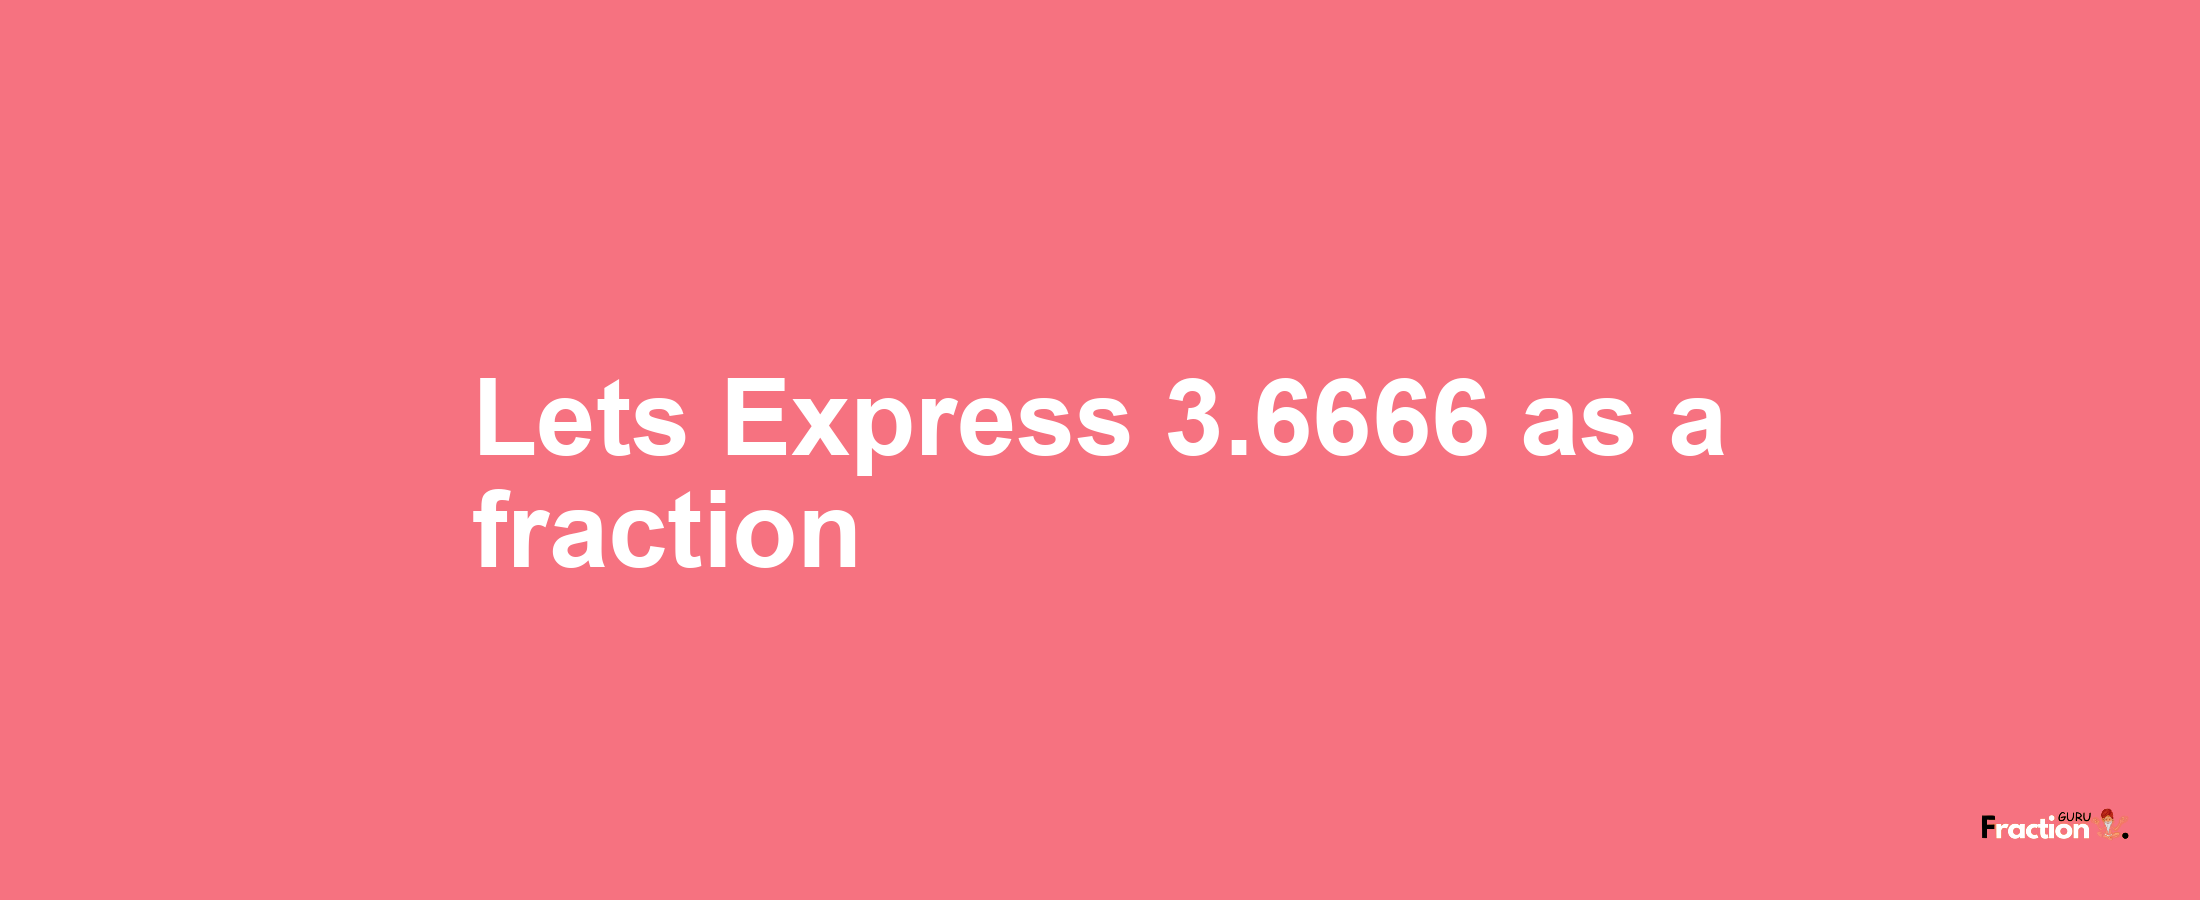 Lets Express 3.6666 as afraction